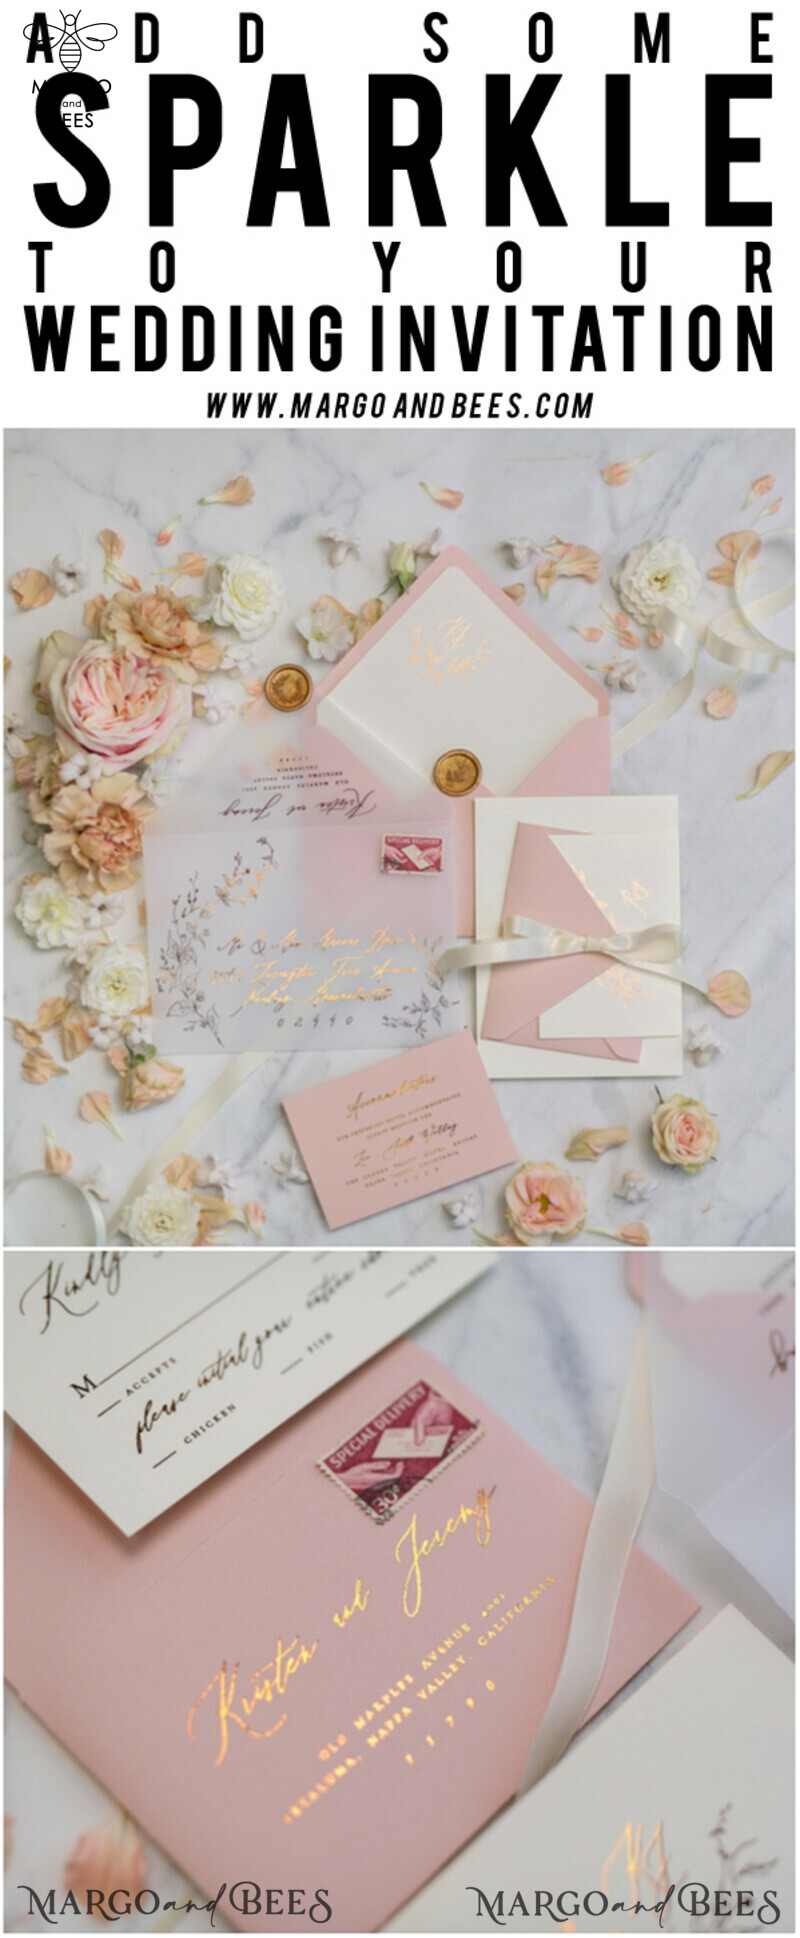 Stunning Blush Pink Wedding Invitations with Glamourous Gold Foil Accents and Elegant Vellum Details: A Bespoke Wedding Invitation Suite-38